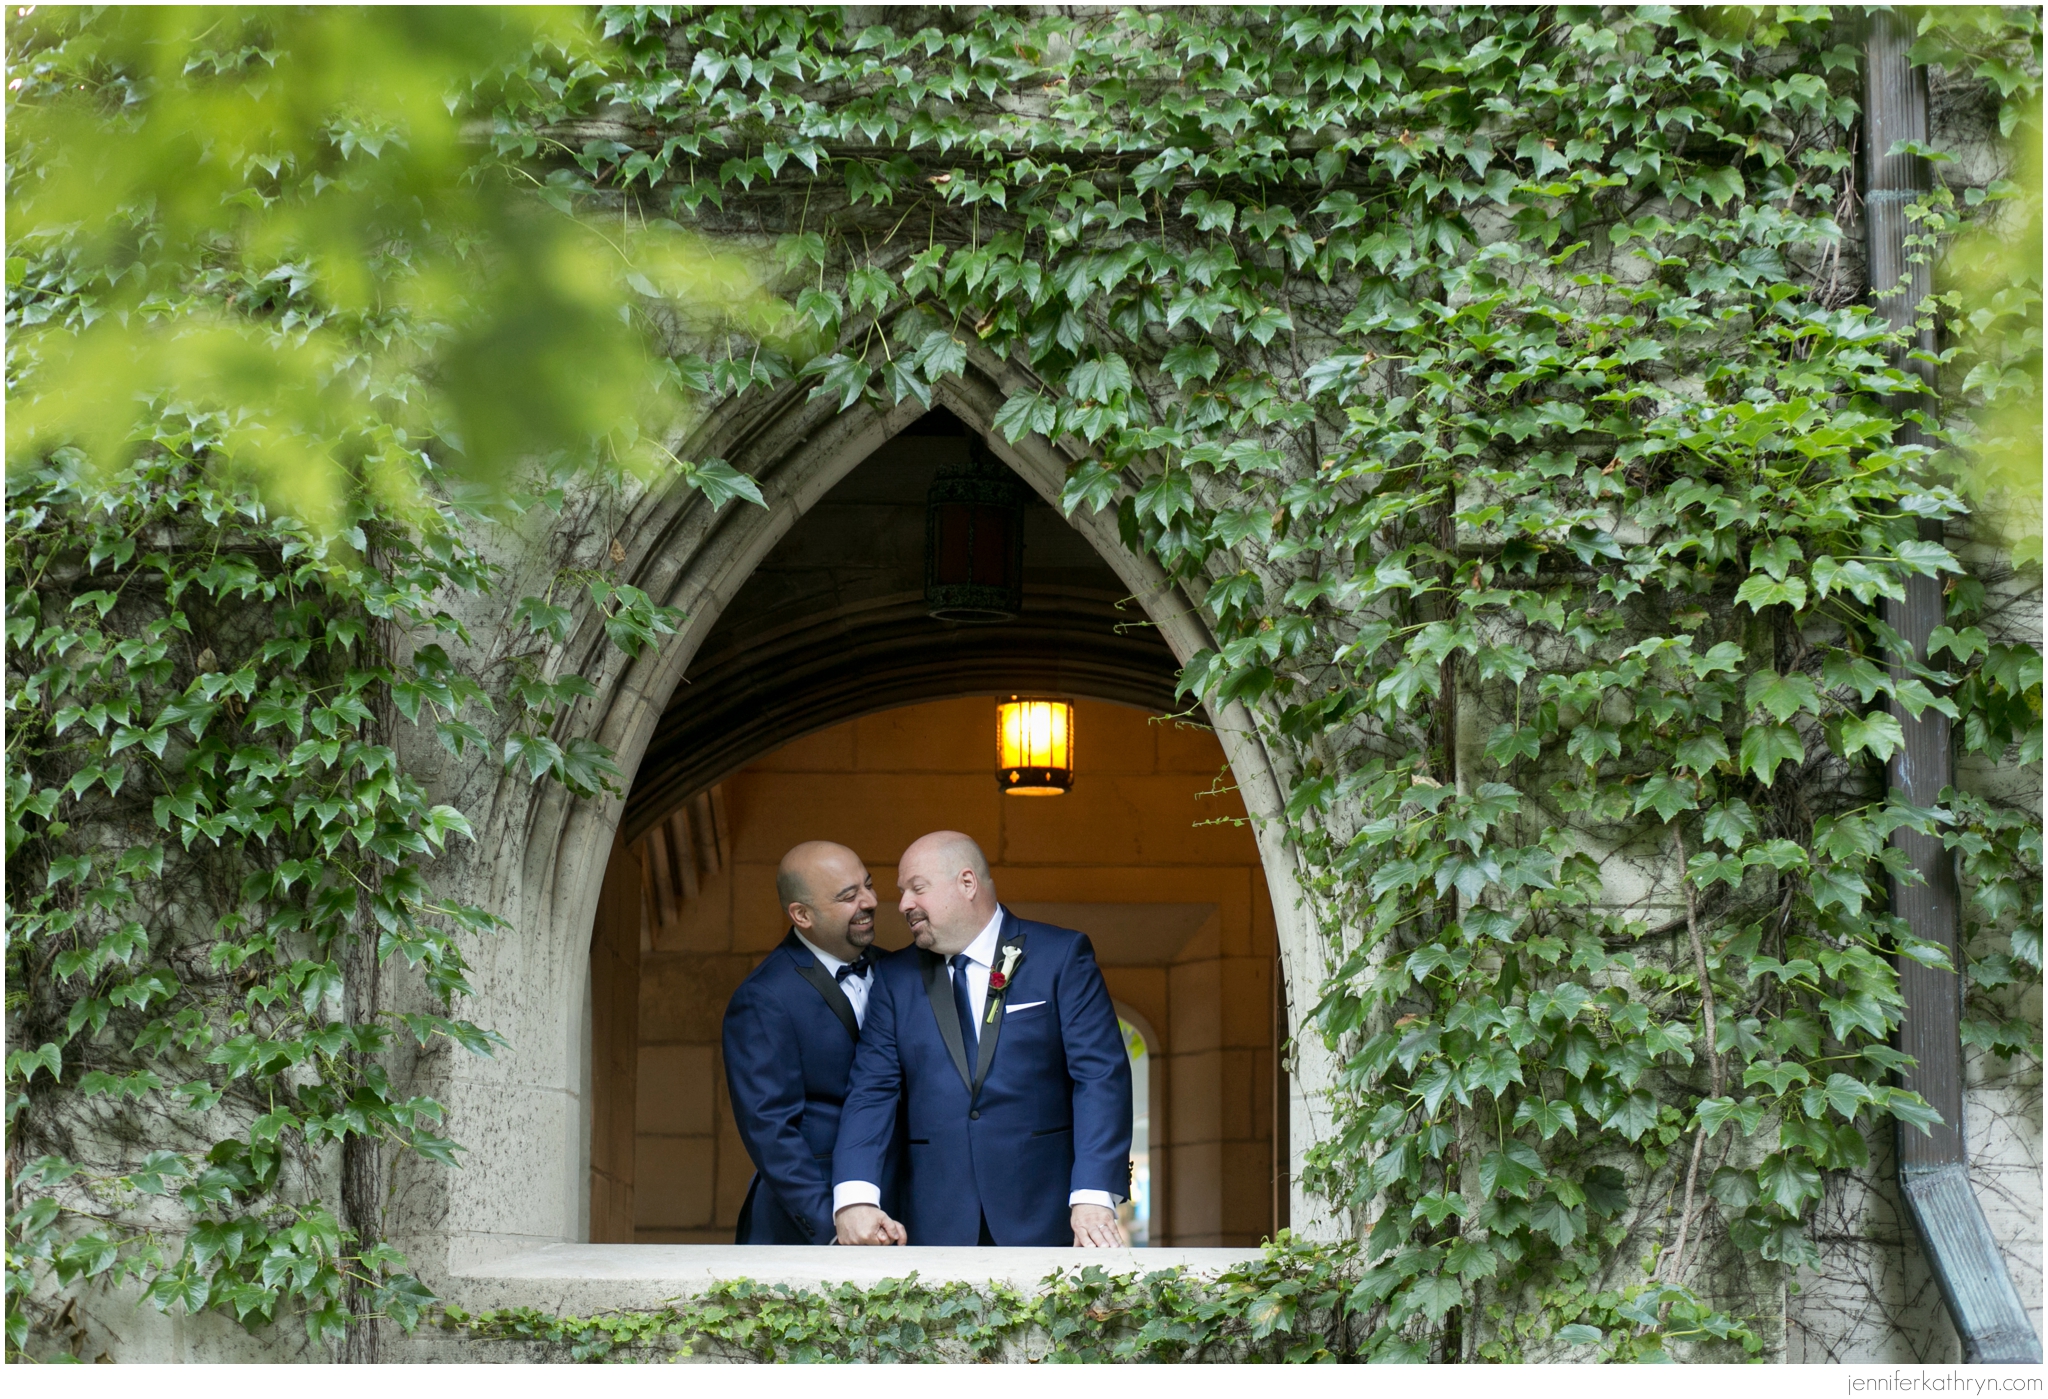 7-16-16 Ed + Alessandro Wedding The Signature Room on the 95th + The Drake Hotel Chicago, IL (C)2016 Jennifer Kathryn Photography